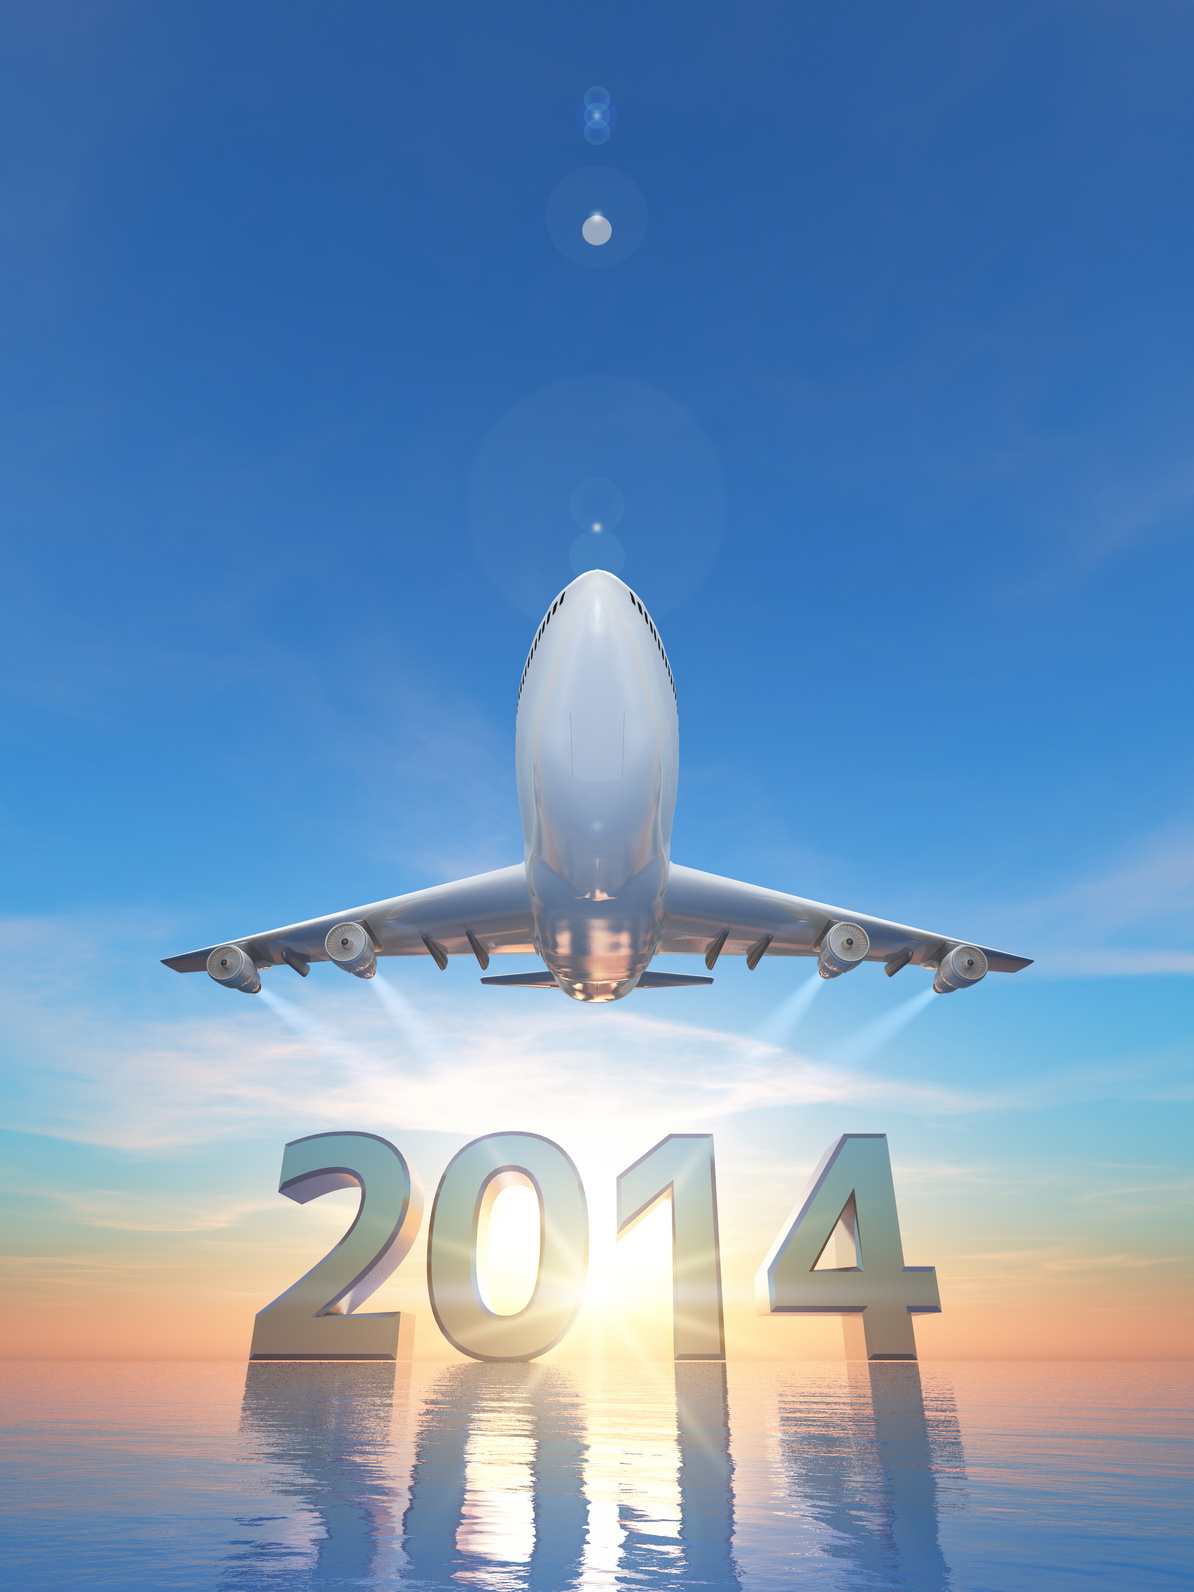 Launch your business in 2014